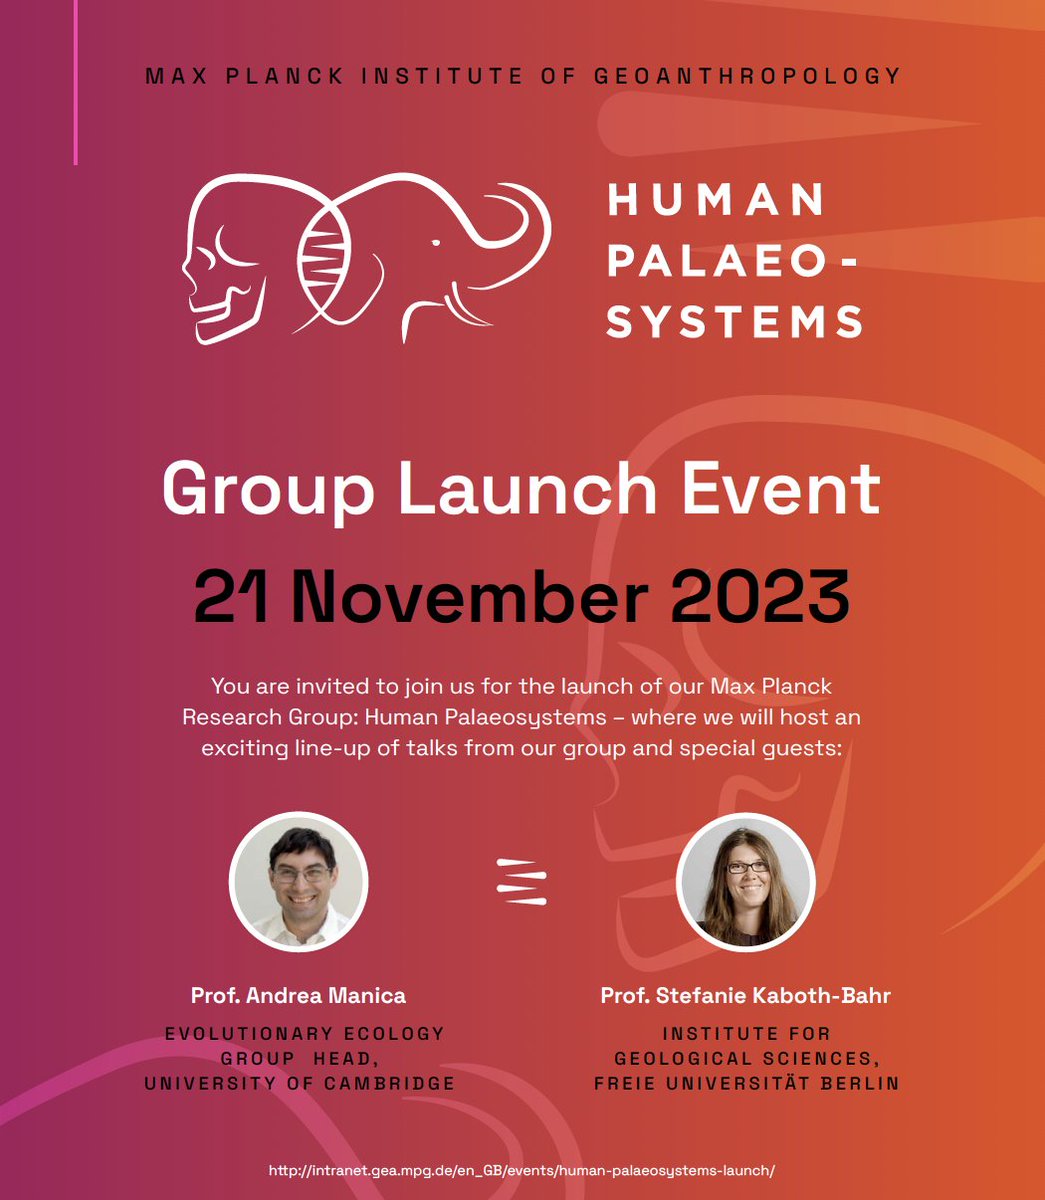 We are happy to announce the new permanent independent @maxplanckpress group at the @MPI_GEA, the Human Palaeosystems Group, led by @DrEleanorScerri - new launch event tomorrow ft. @DrManica & @KabothBahr!